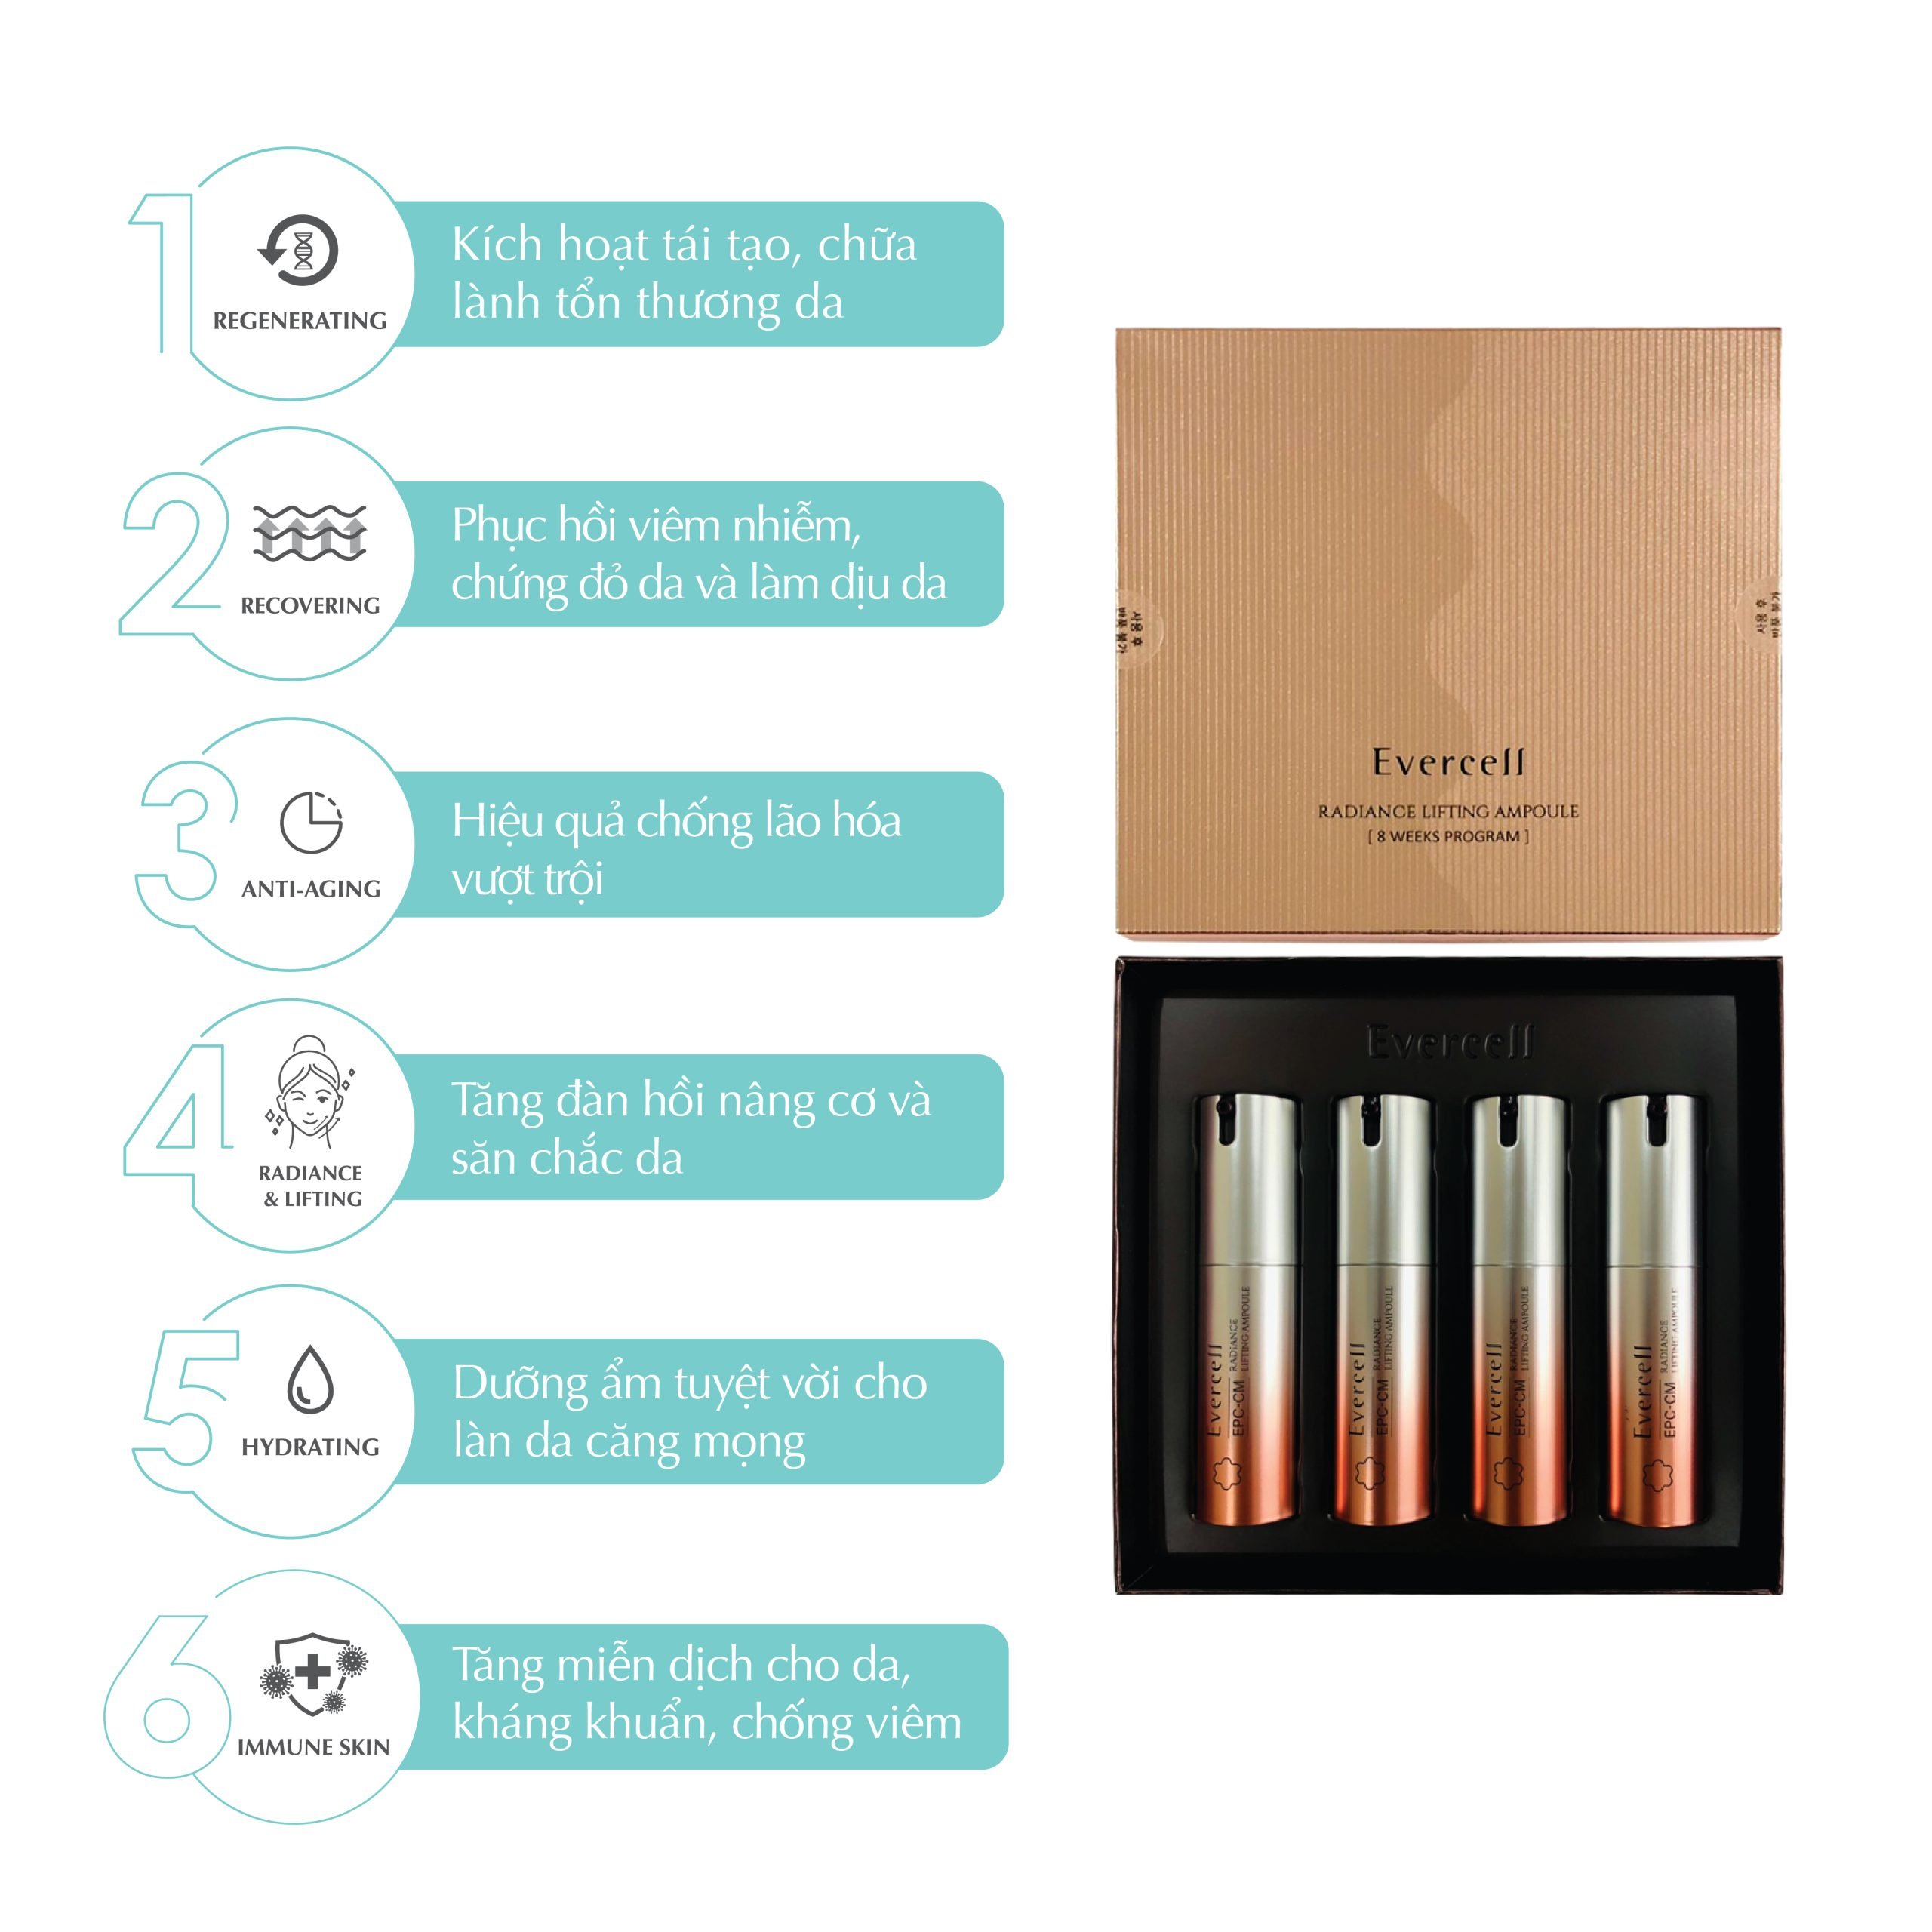 Set 4 Evercell Radiance Lifting Ampoule